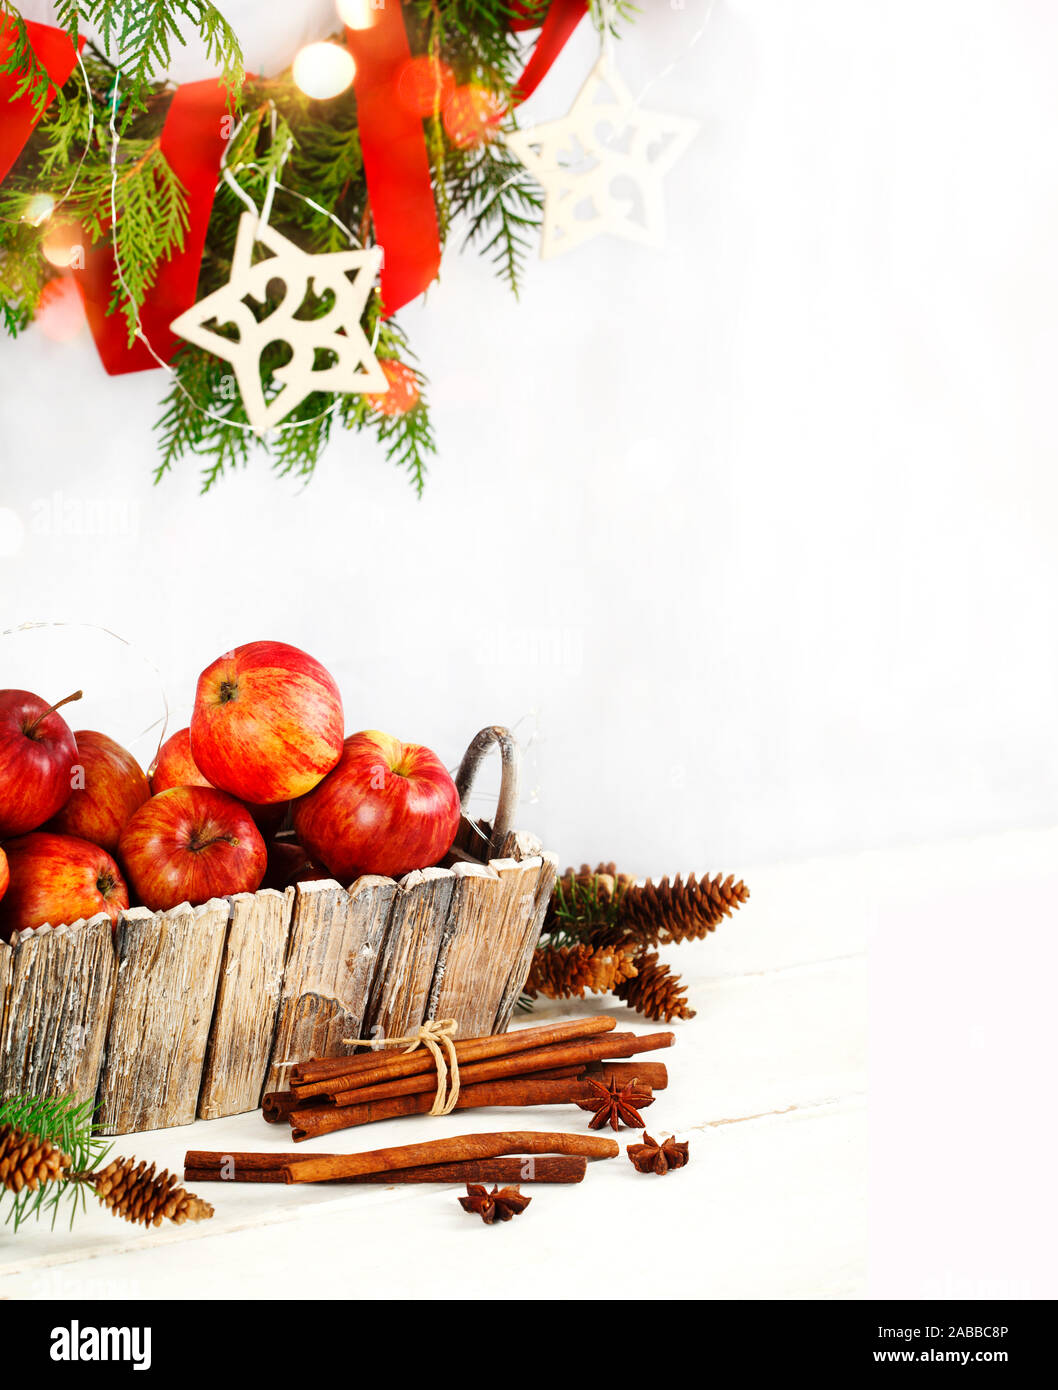 Christmas wreath and decoration with apples, cinnamon and pine cones Stock Photo